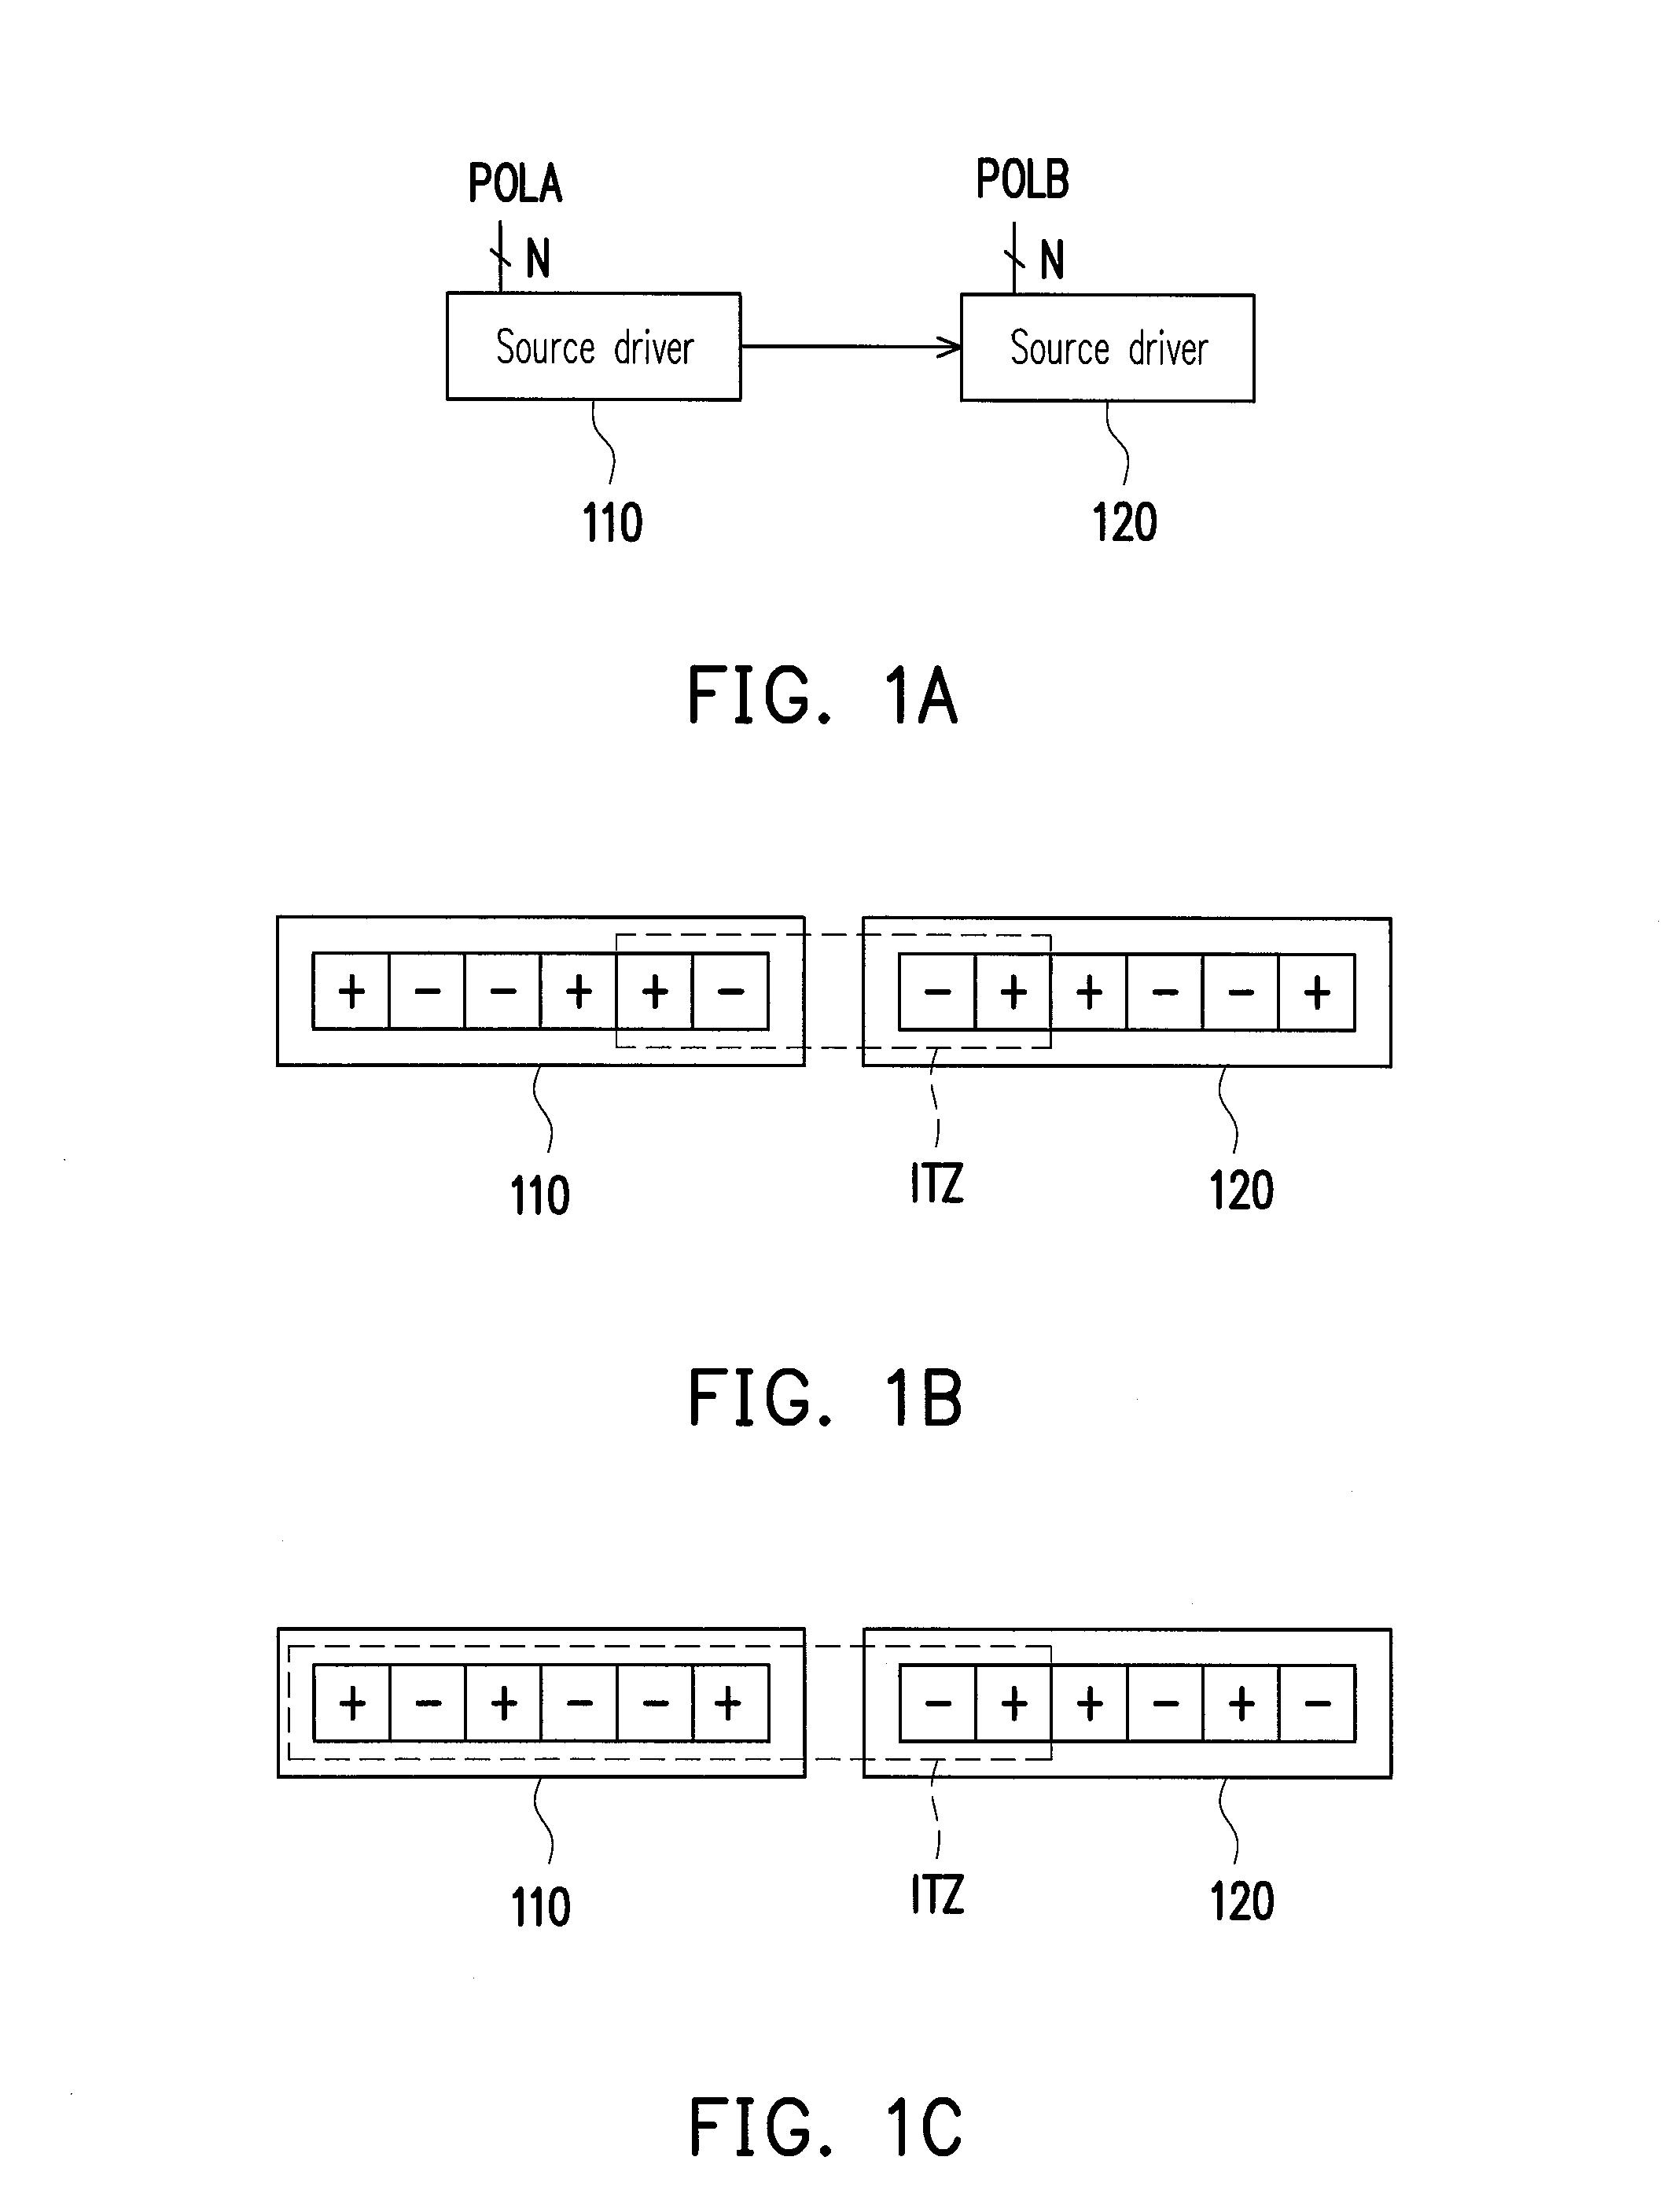 Liquid crystal display apparatus, source driver and method for controlling polarity of driving signals thereof